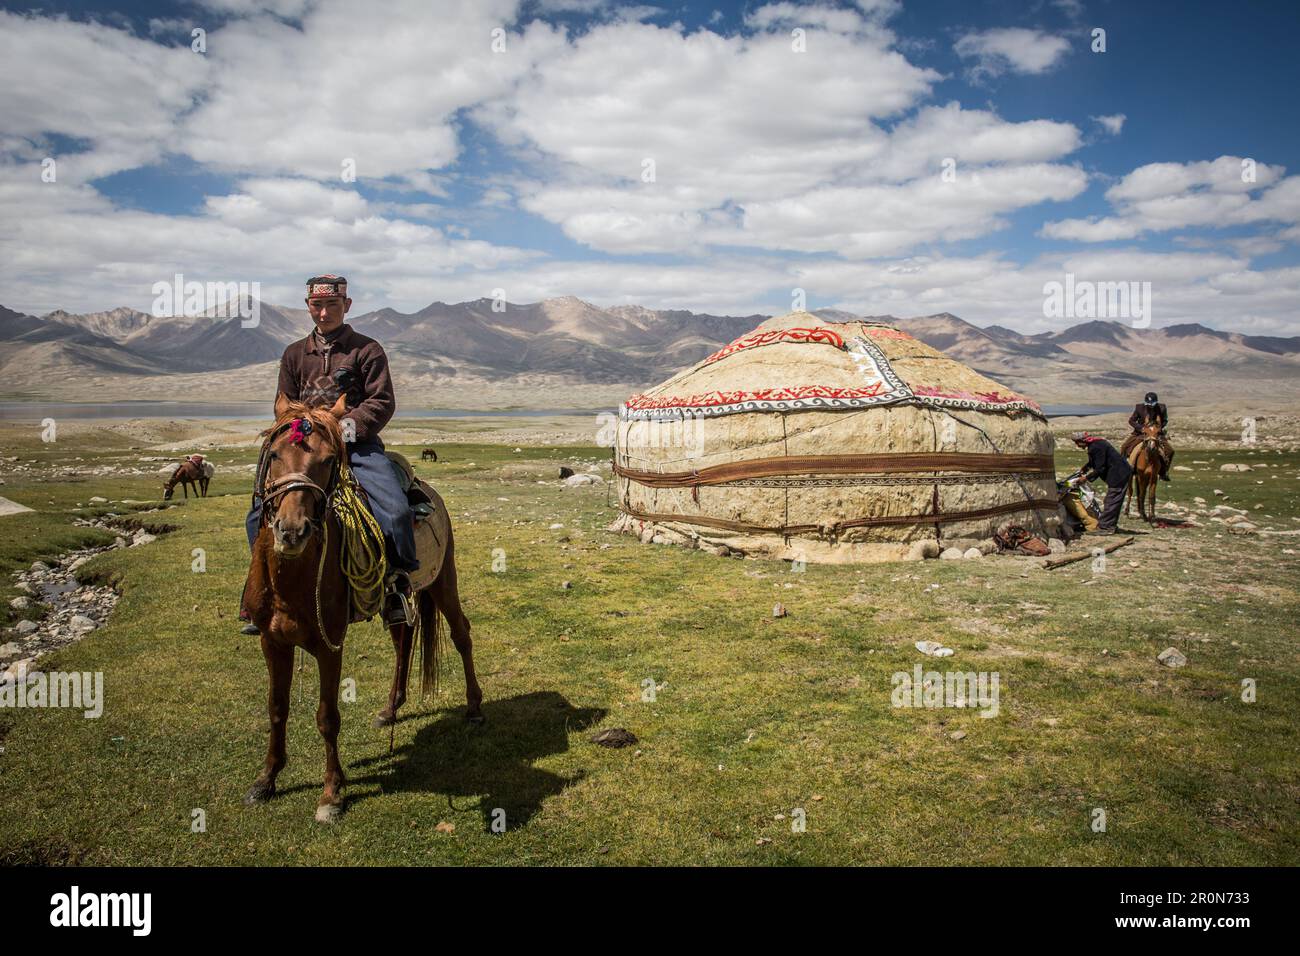 Kirgise on horse in front of yurt, Pamir, Afghanistan, Asia Stock Photo